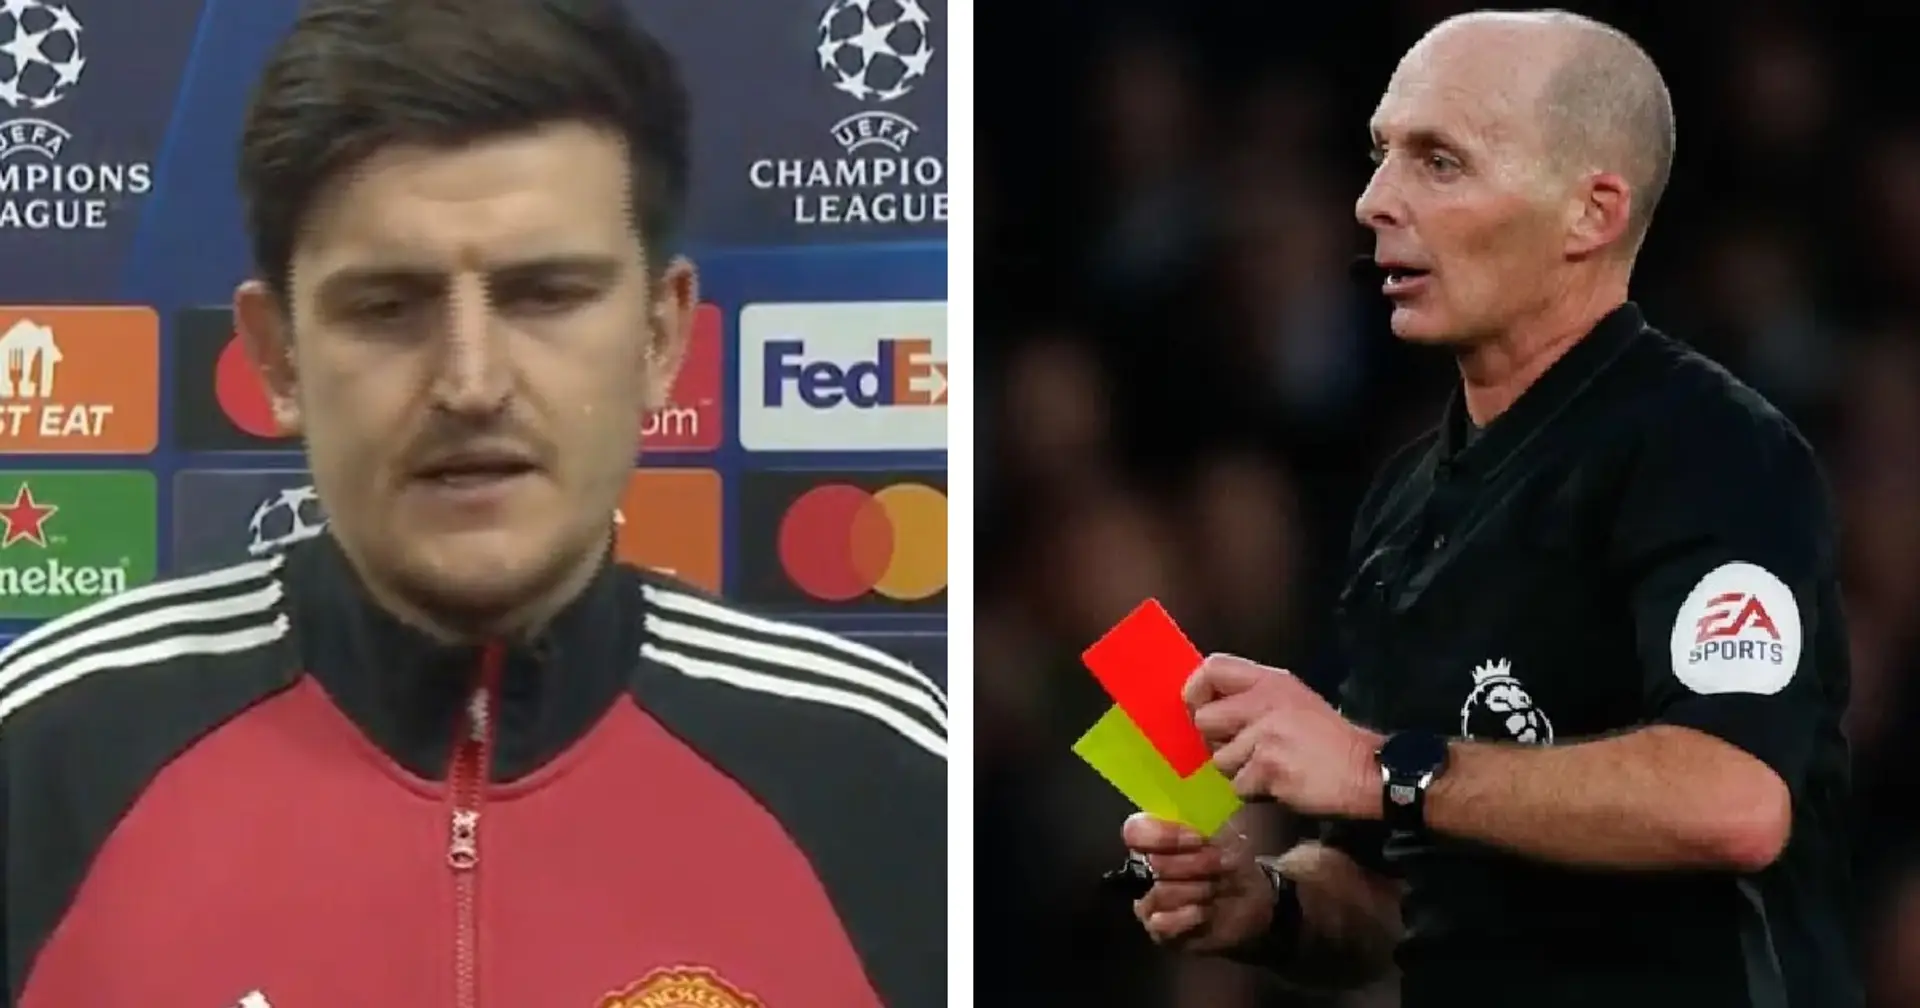 Maguire gets booked every 60 mins under Ten Hag in Premier League - he's only started two games